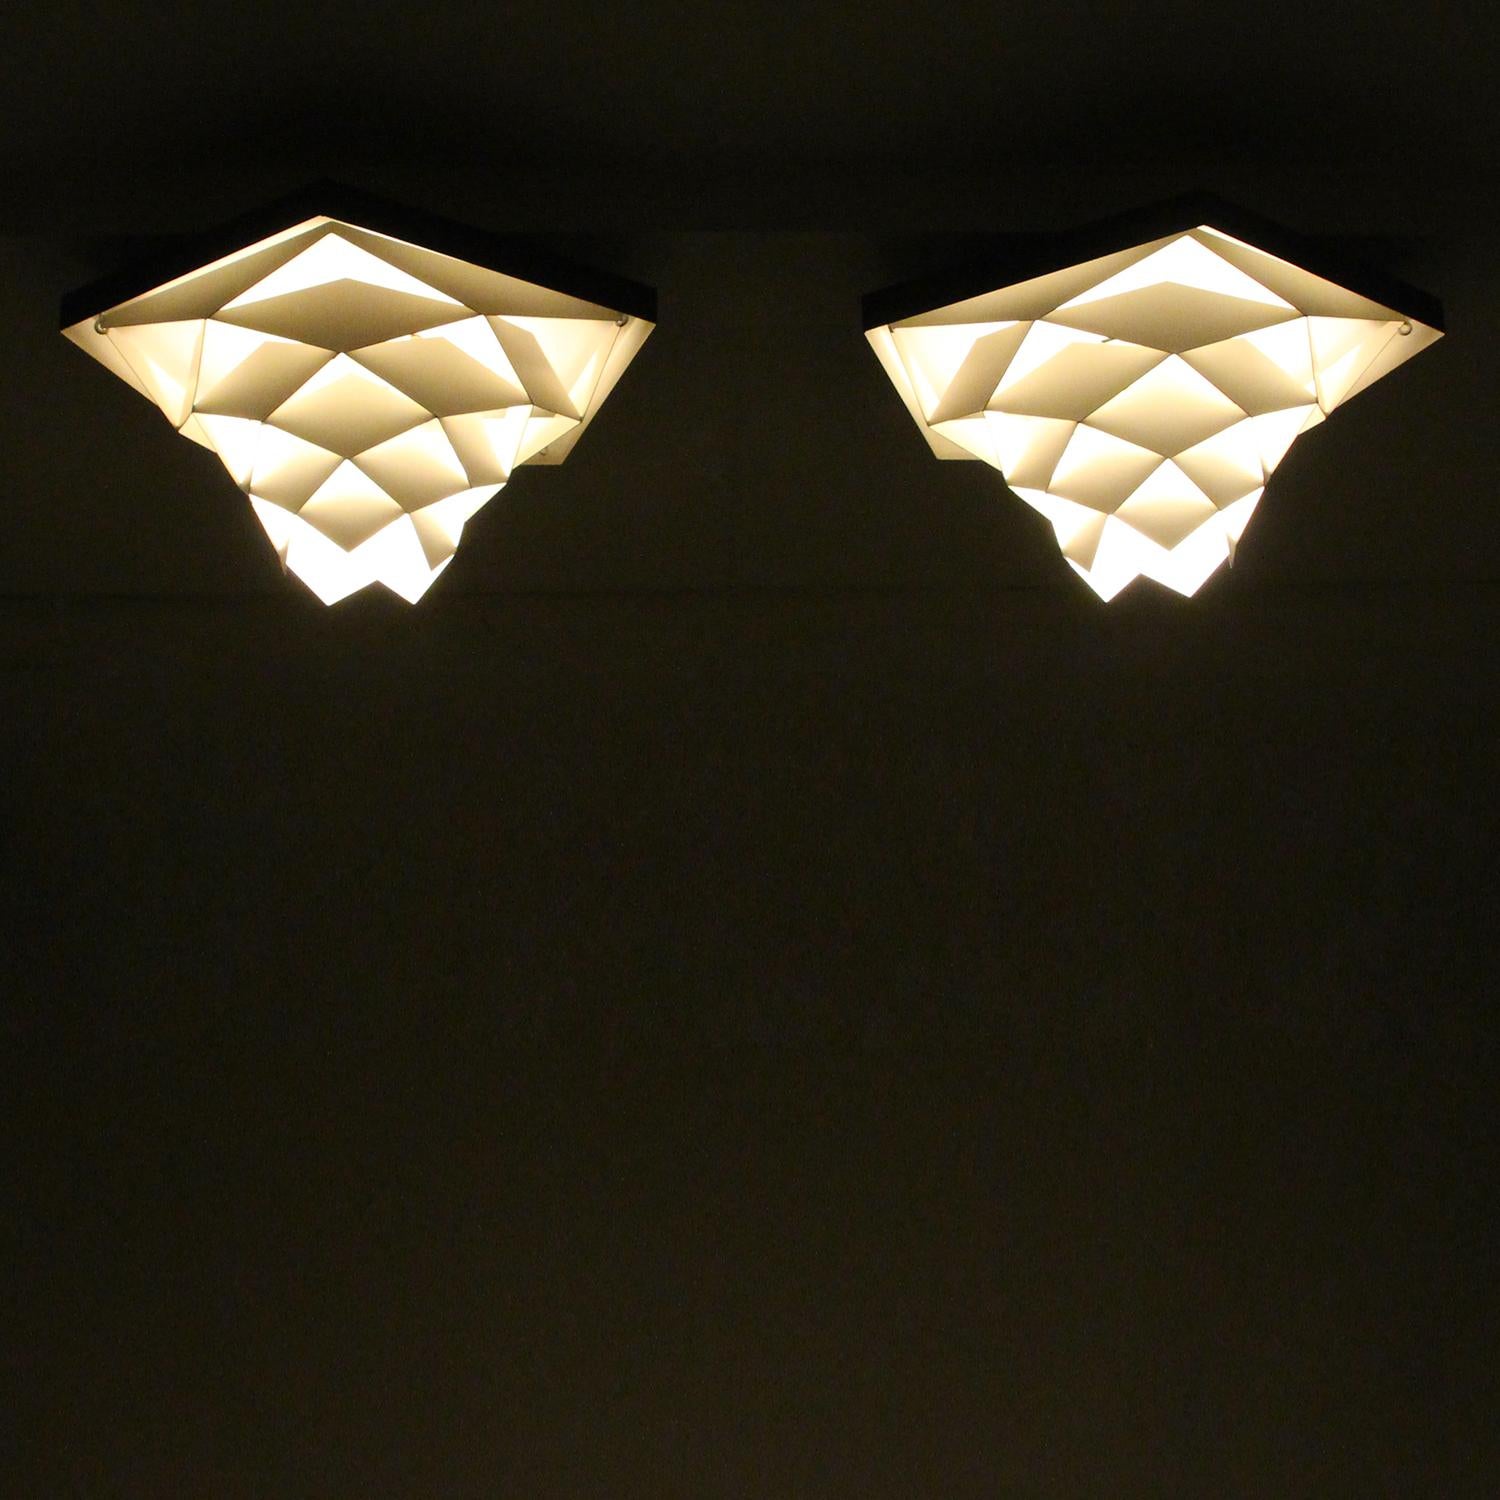 Symfoni Flush, pair of ceiling flush lights by Preben Dal in the early 1960s and produced by H. Følsgaard Elektro - extremely rare pair of Danish white and gray ceiling flush lights in very good vintage condition!

A pair of enchanting